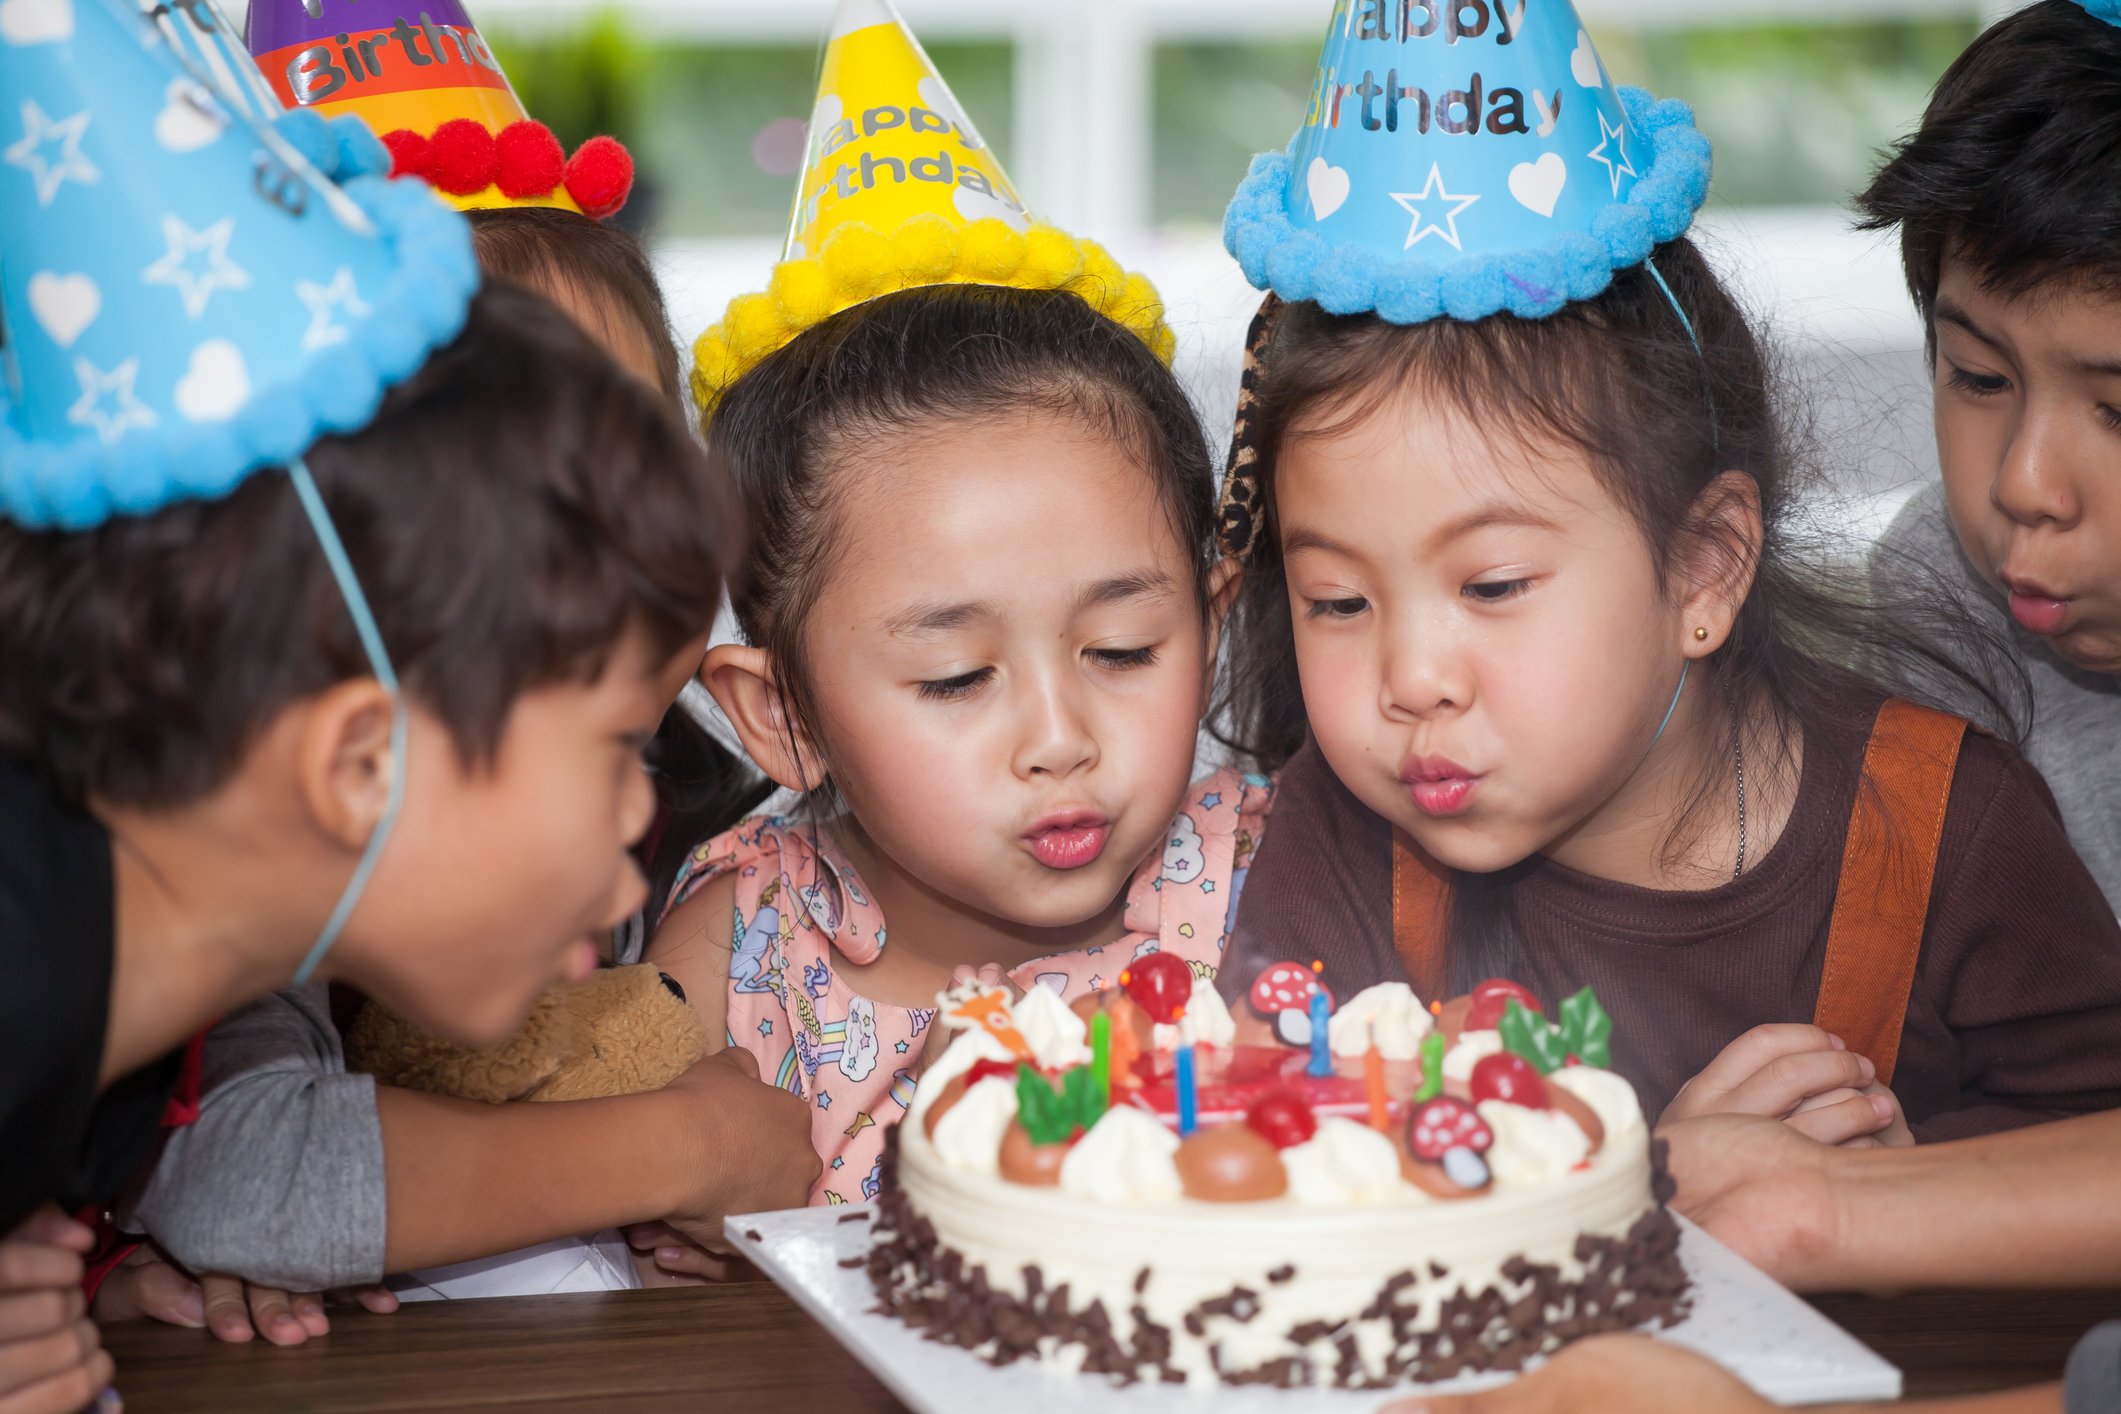 It was a girl's birthday in OP's class. | Photo: Getty Images